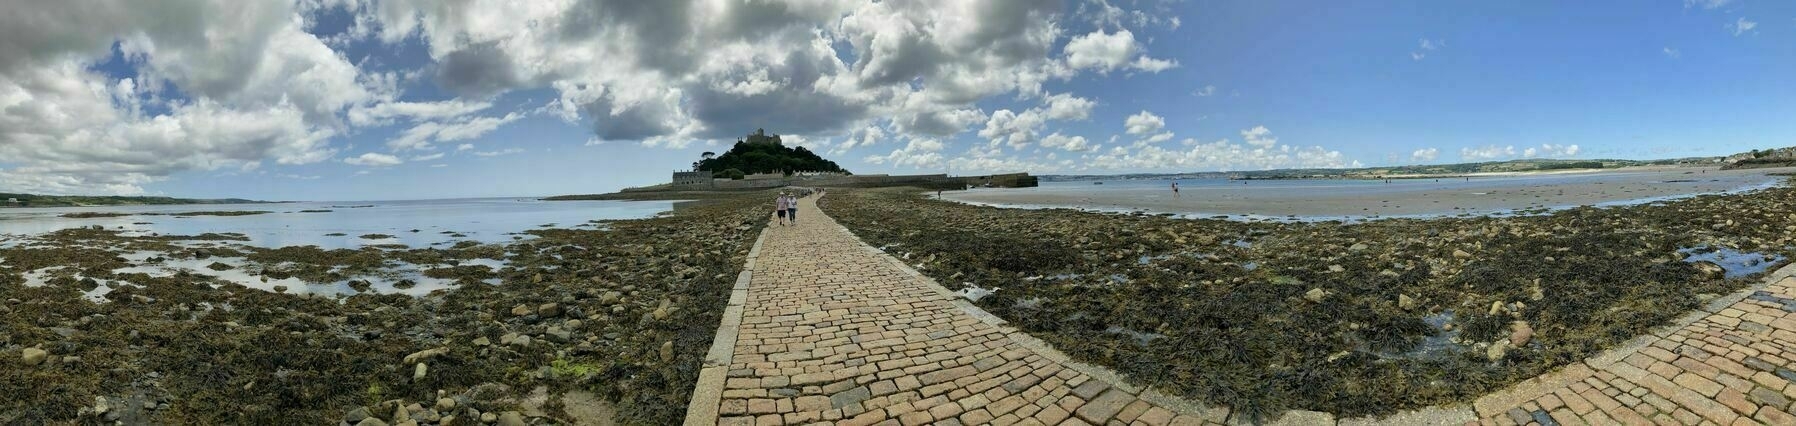 A view of St Michael's Mount in Cornwall UK